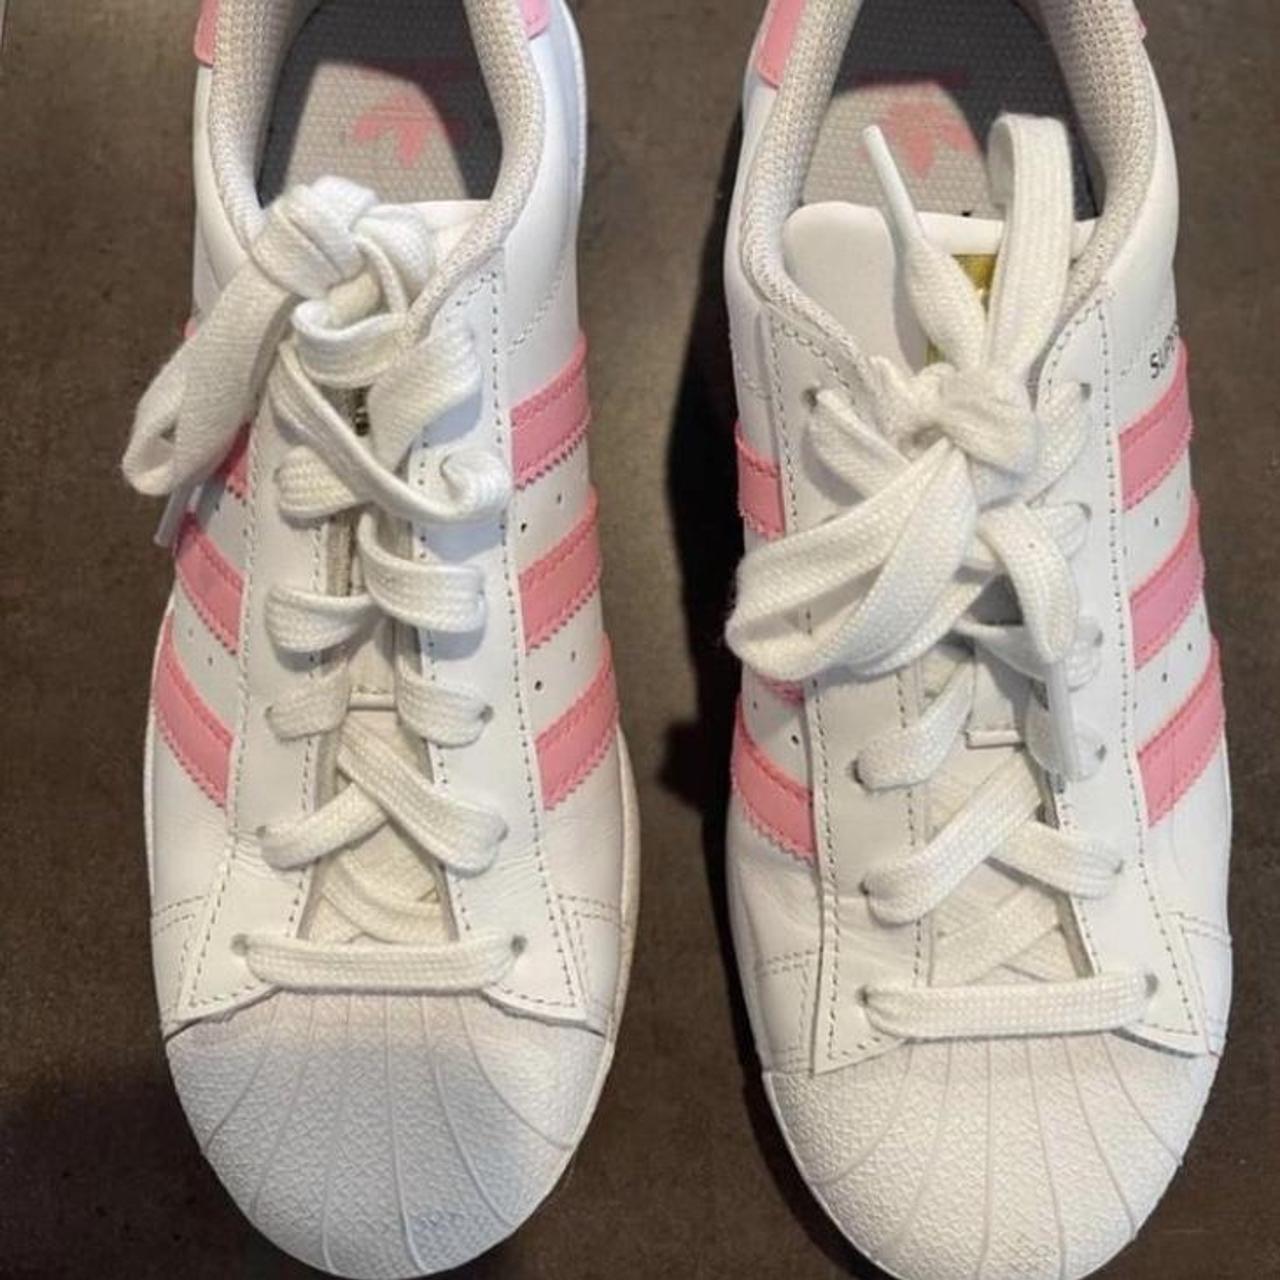 Adidas Women's Pink and White Footwear (2)